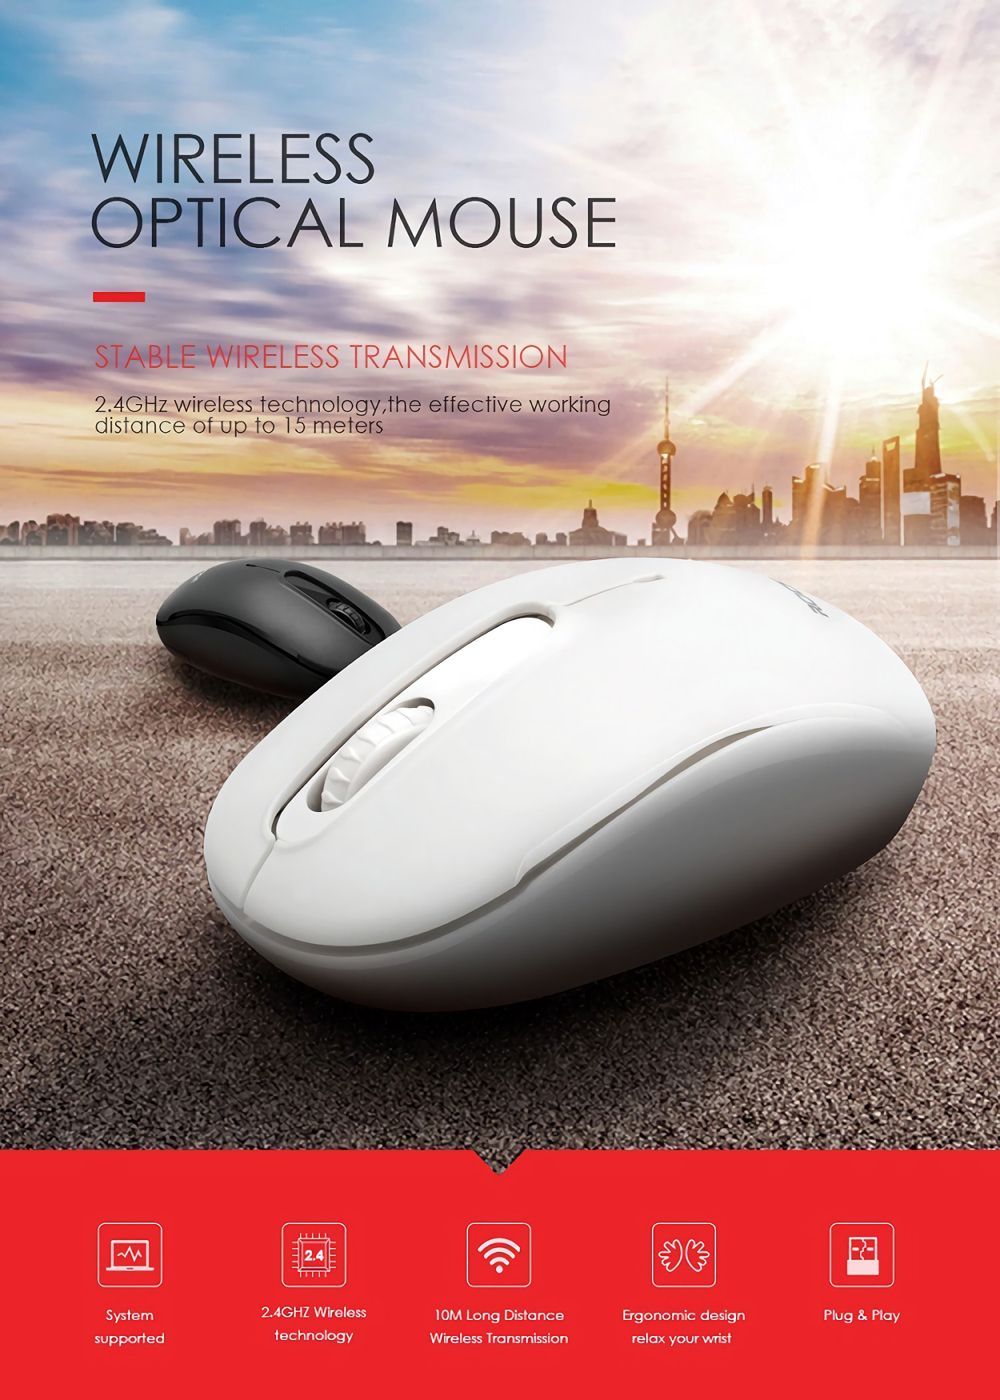 Rocketek-W01-1600DPI-24GHz-Wireless-Optical-Mouse-for-Office-Use-1445871